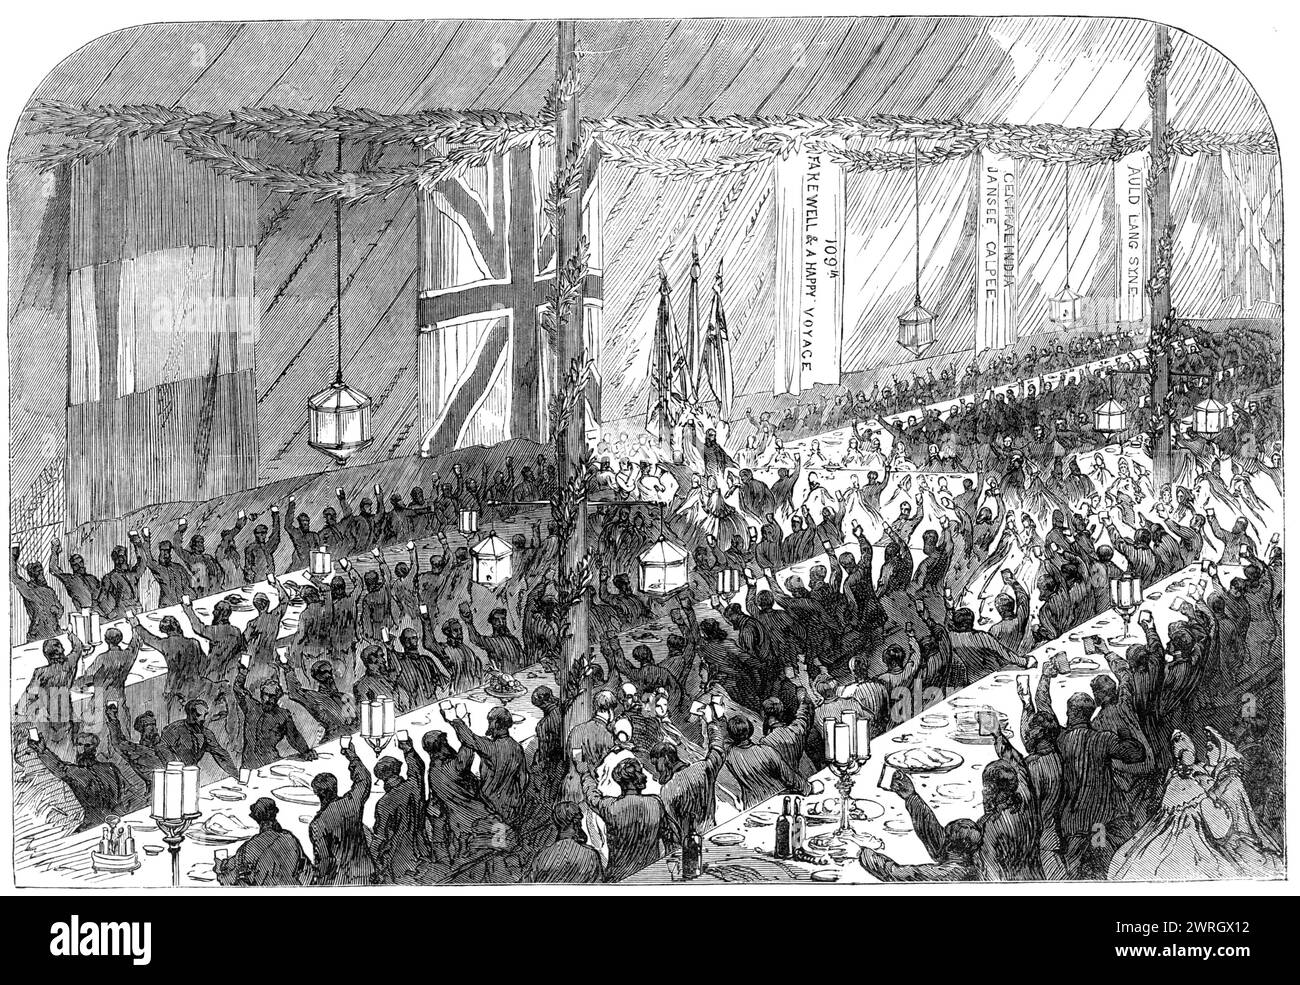 Farewell banquet to the 109th Regiment at Kurrachee, [modern Karachi, Pakistan], 1864. '...the European residents...gave a farewell entertainment to that gallant corps...the whole regiment, including the women and children, were invited to dinner. Two long rows of tents...were pitched, beautifully decorated and lighted for the occasion...Some nine hundred persons sat down to the repast provided, which was of the most substantial land, while the hospitable folks of Kurrachee, both ladies and gentlemen, moved along the ranges of tables to see that their guests were properly served. Cheer after c Stock Photo